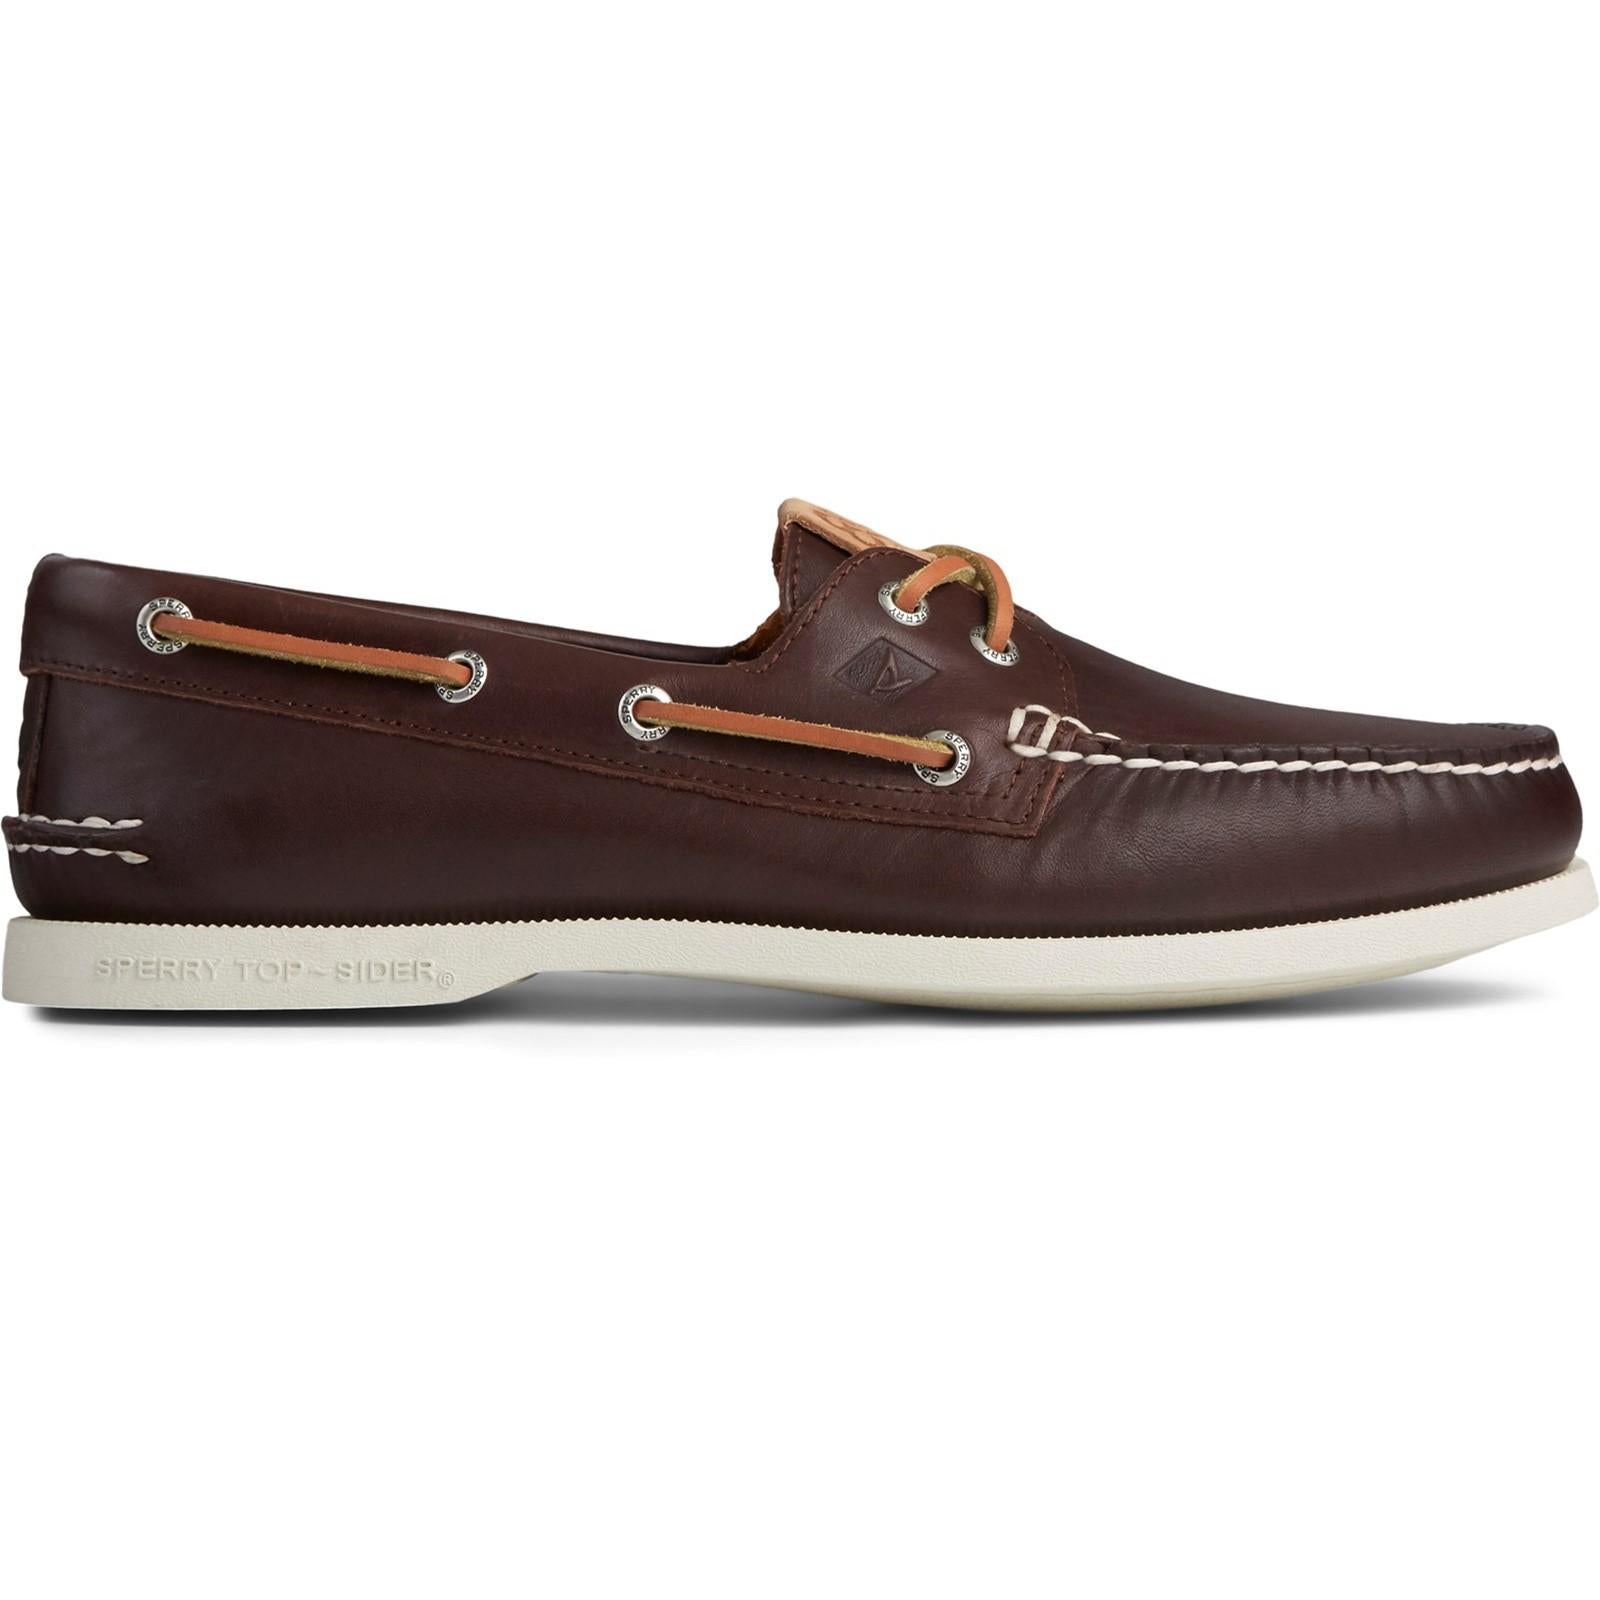 Sperry Top-sider Authentic Original 85th Anniversary Boat Shoe